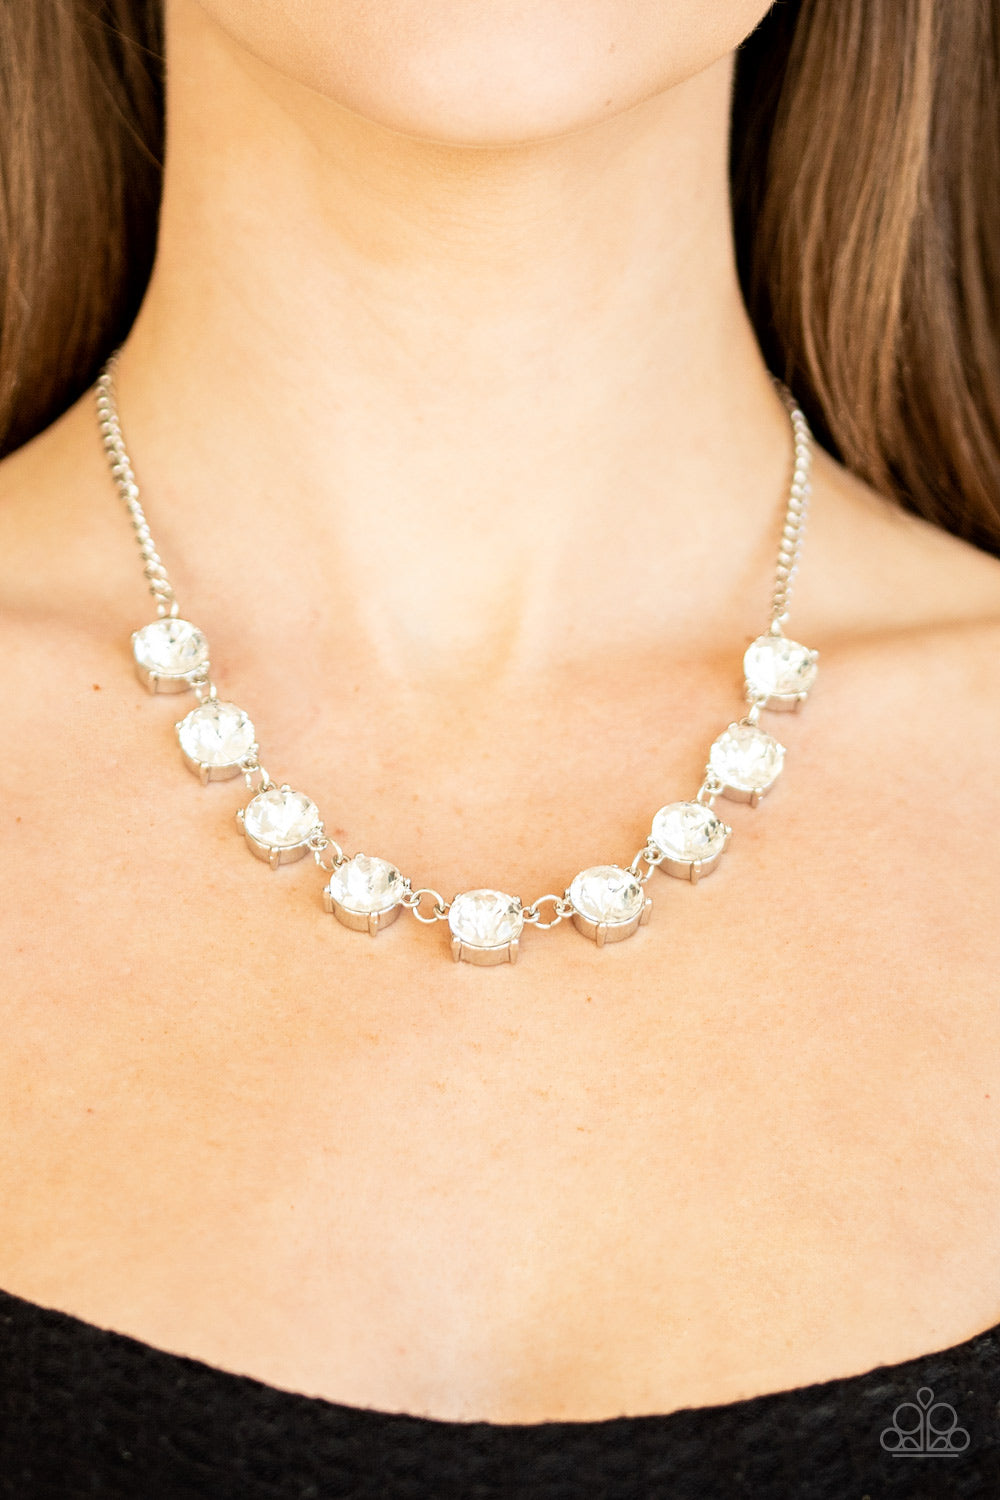 Iridescent Icing White Necklace - Paparazzi Accessories